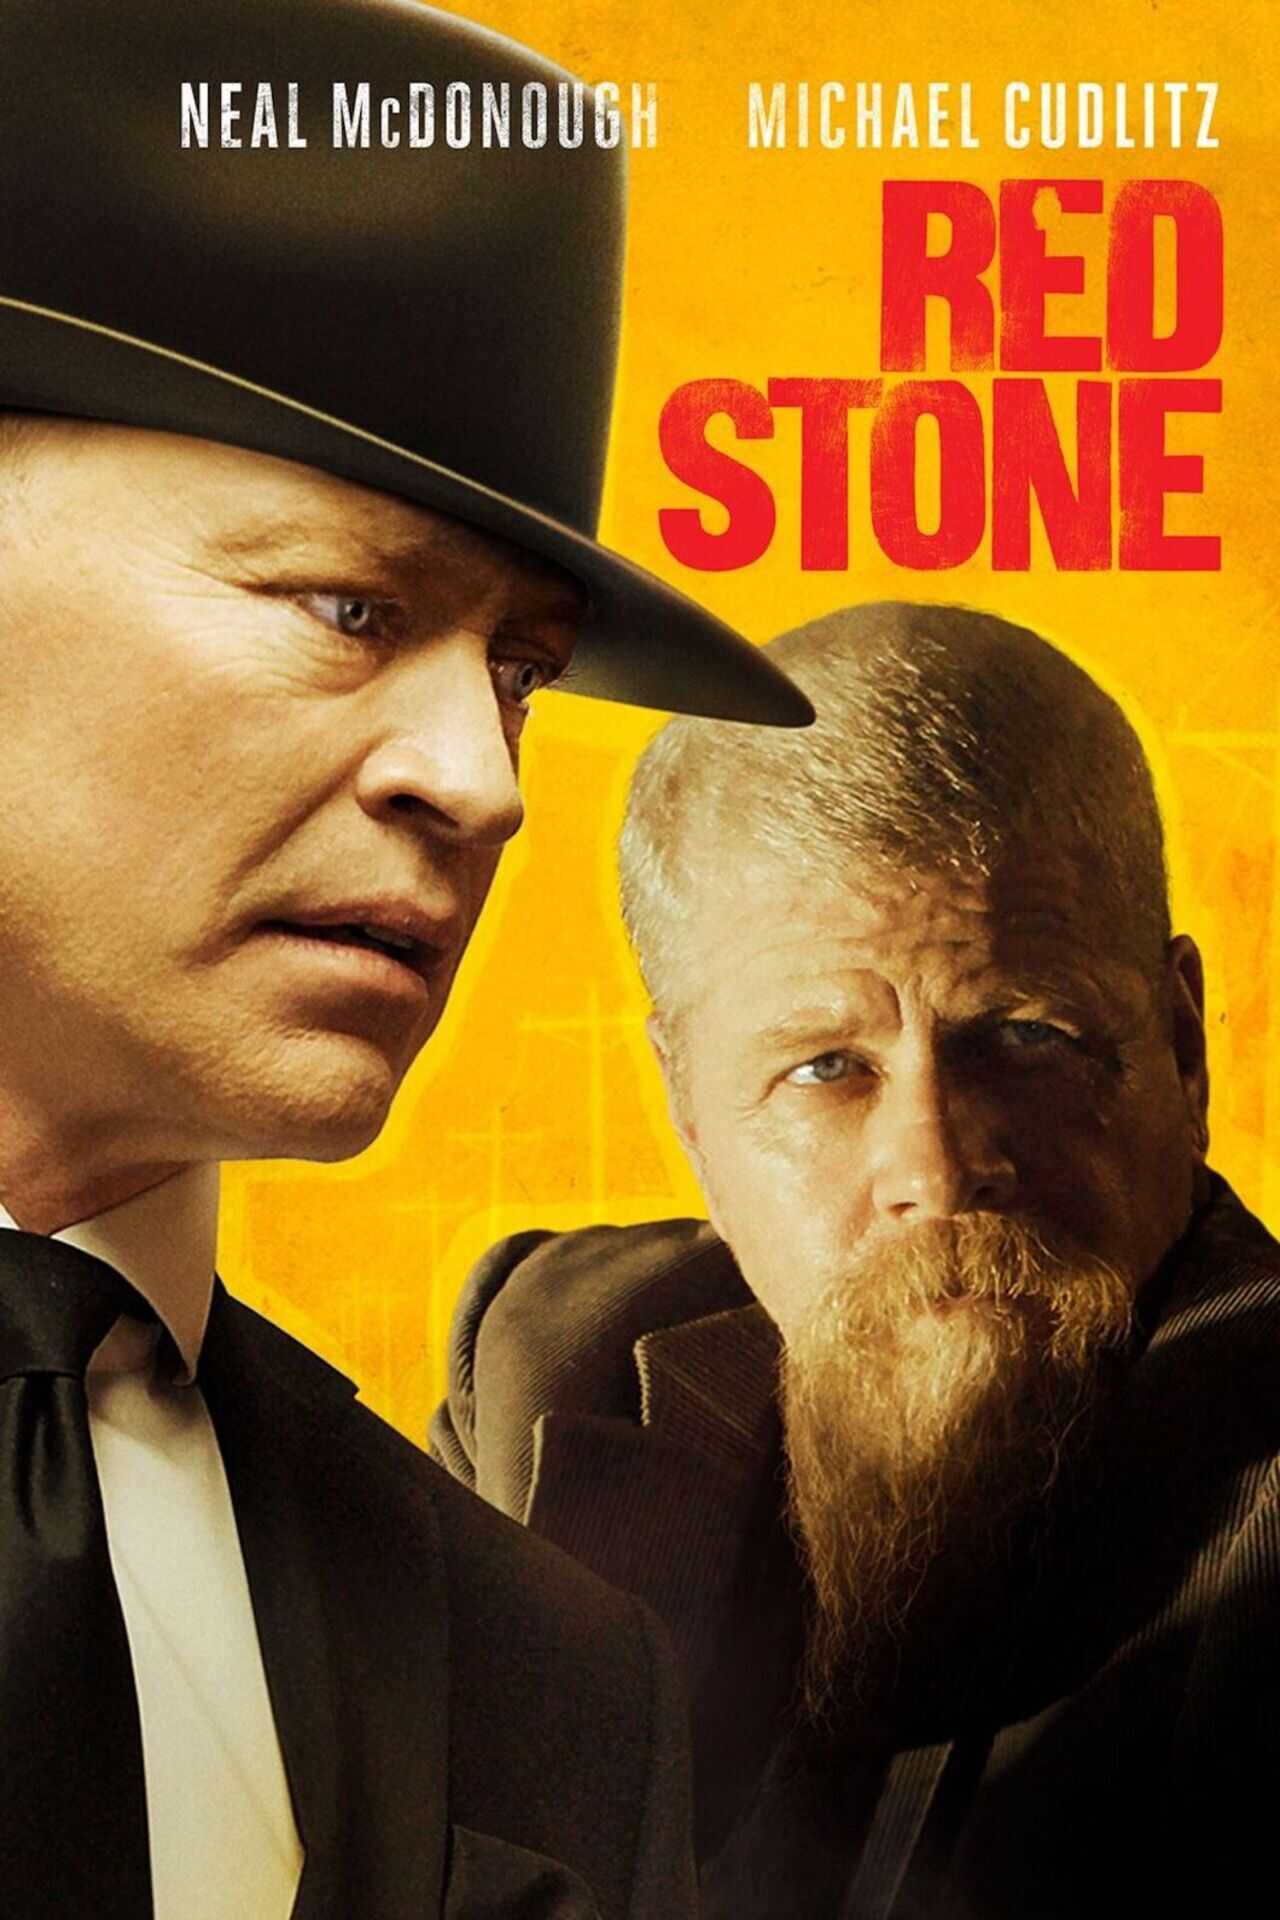 Theatrical poster for Red Stone.